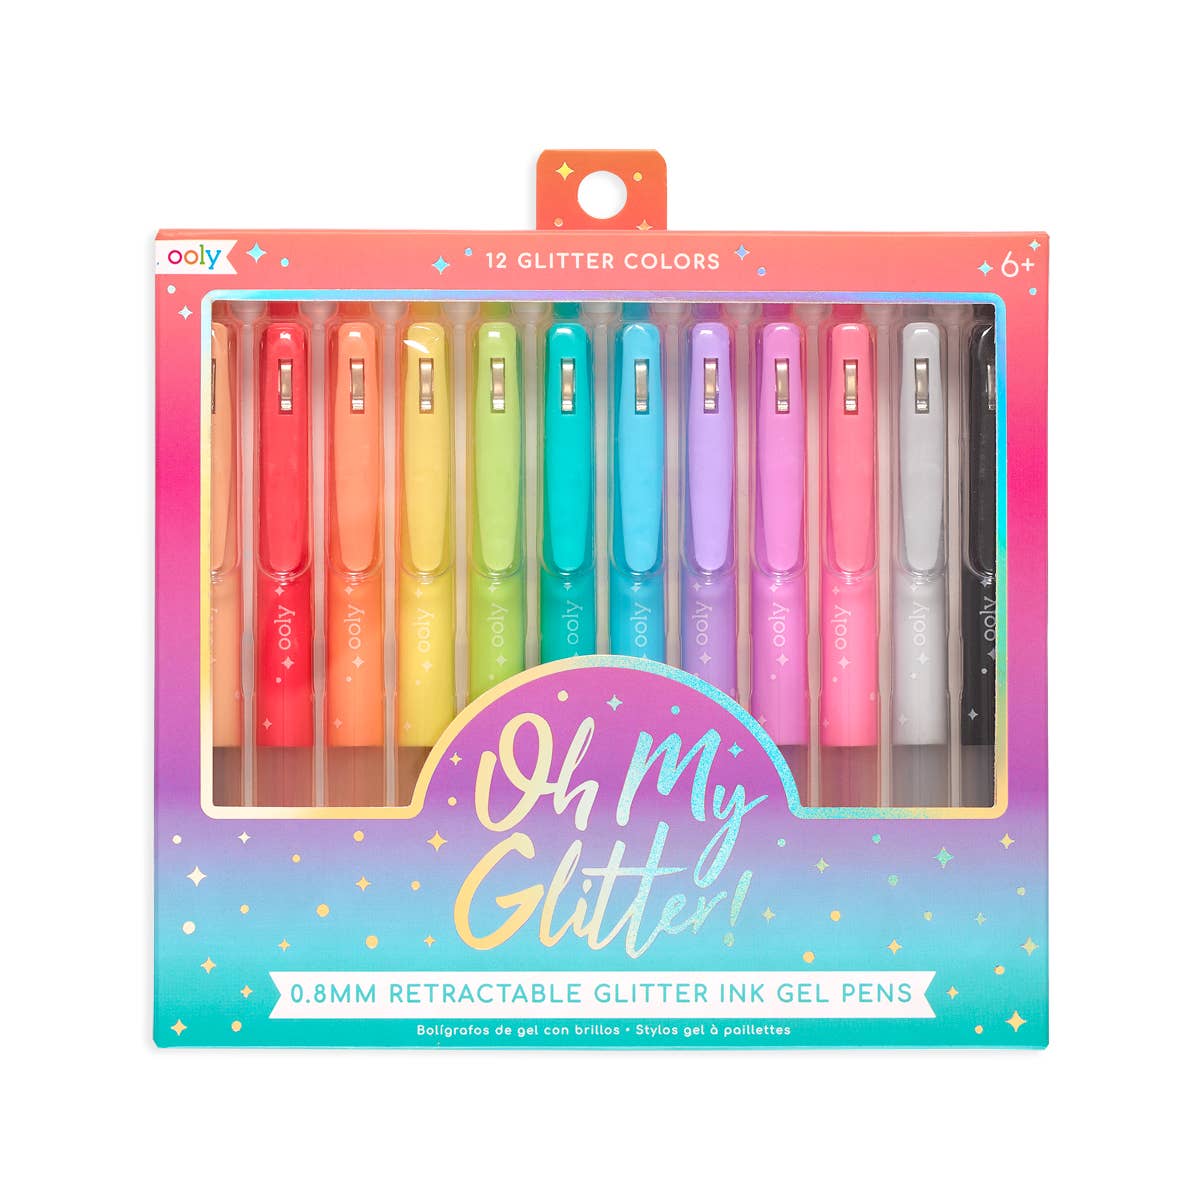 OOLY - Oh My Glitter! Retractable Glitter Gel Pens - Set of 12